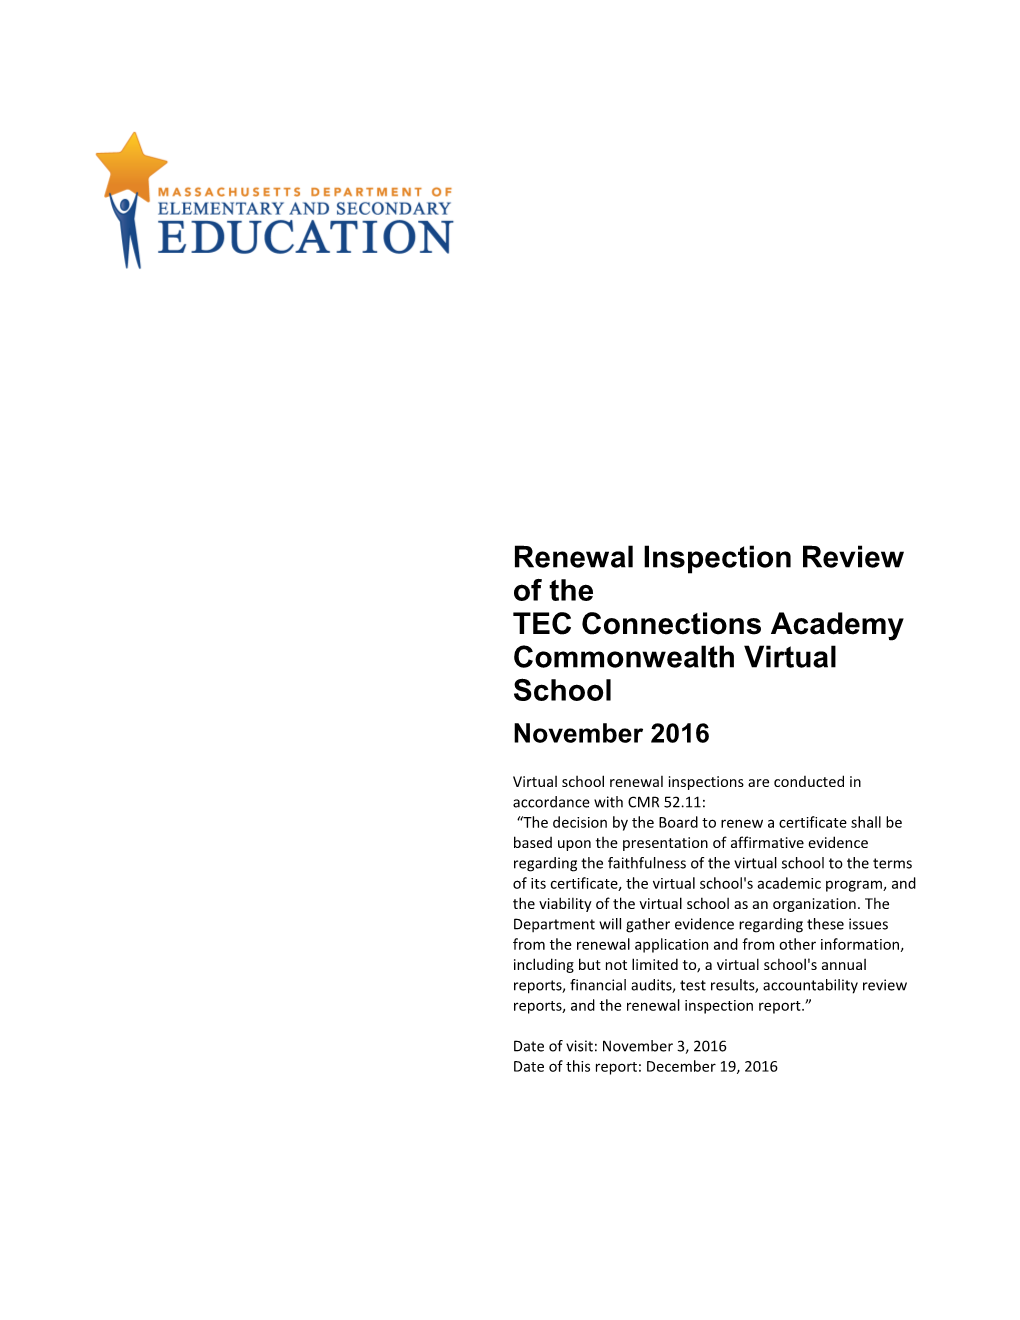 TEC Connections Academy - November 2016 Renewal Inspection Report